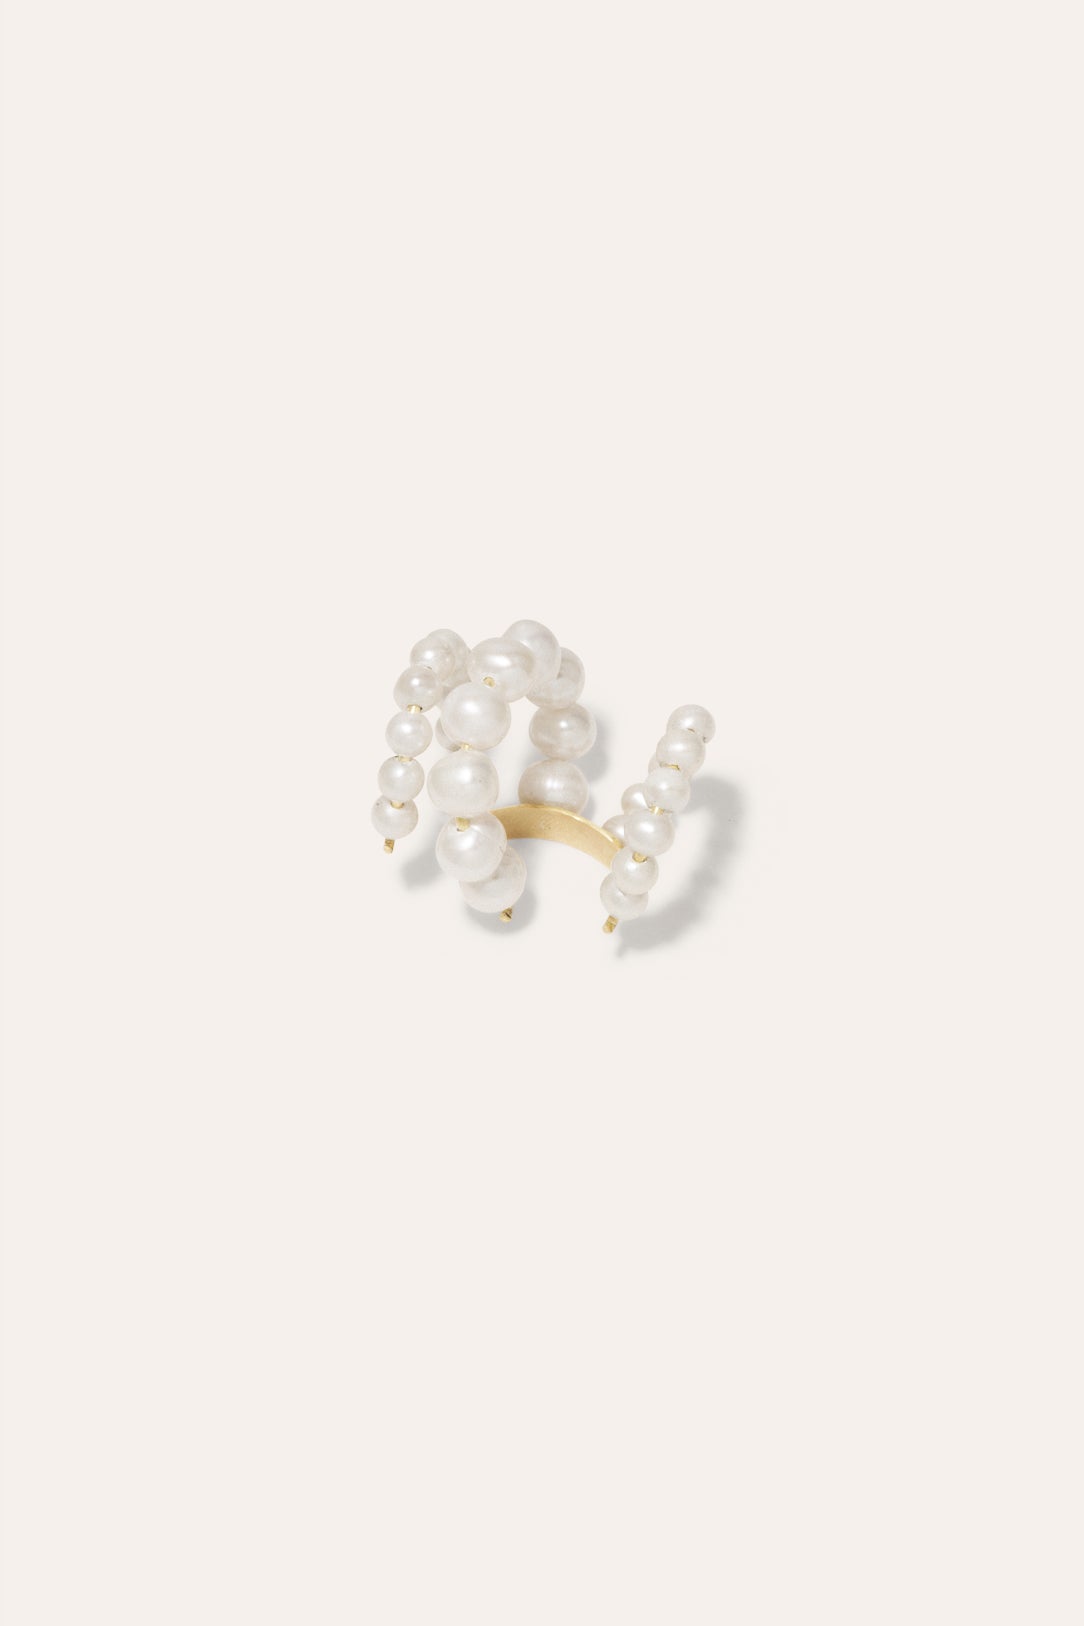 Emergence - Pearl and Gold Vermeil Ear Cuff | Completedworks